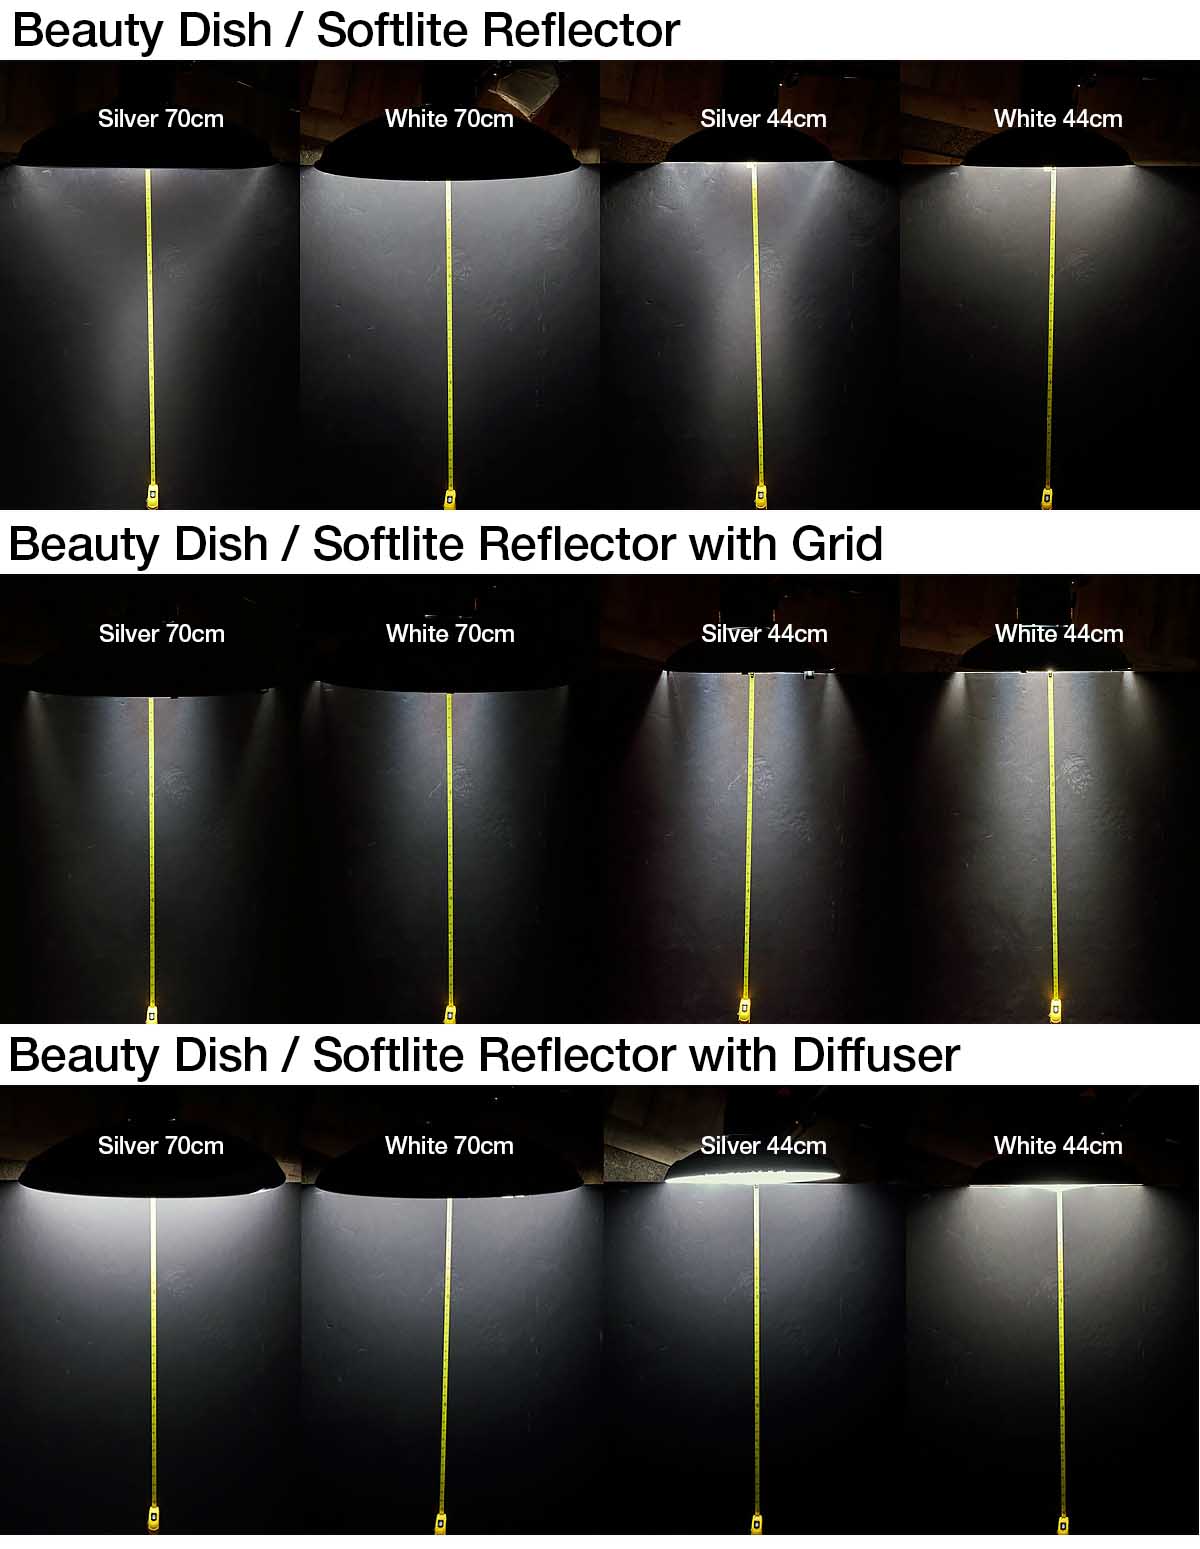 Beauty Dish only, with Grids, with Diffusion Socks